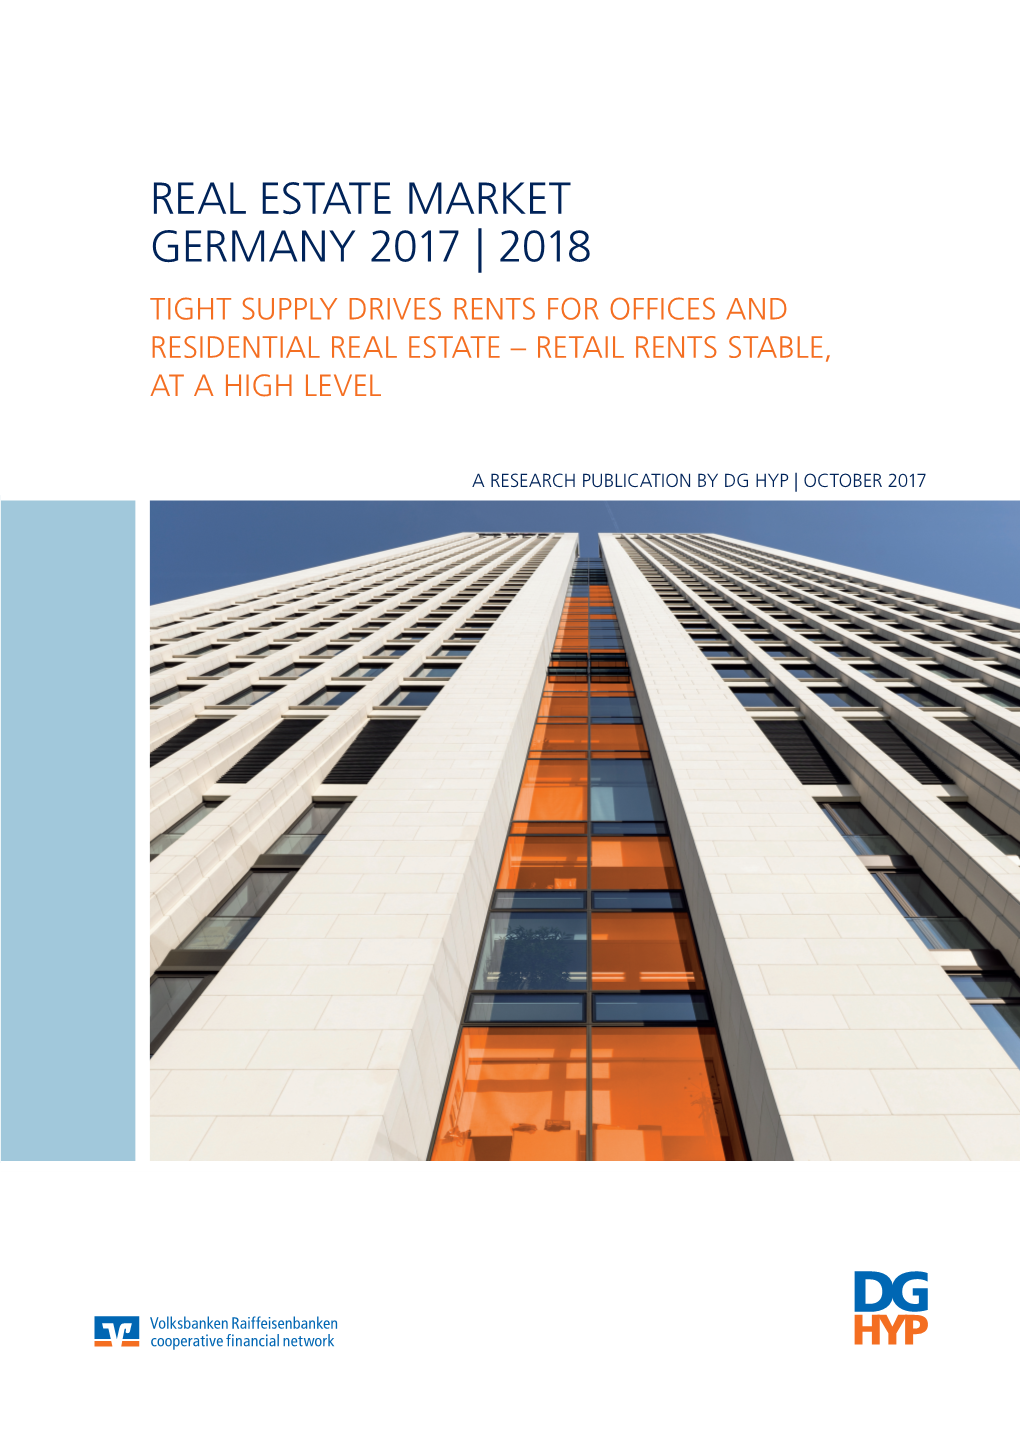 Real Estate Market Germany 2017 | 2018 Tight Supply Drives Rents for Offices and Residential Real Estate – Retail Rents Stable, at a High Level